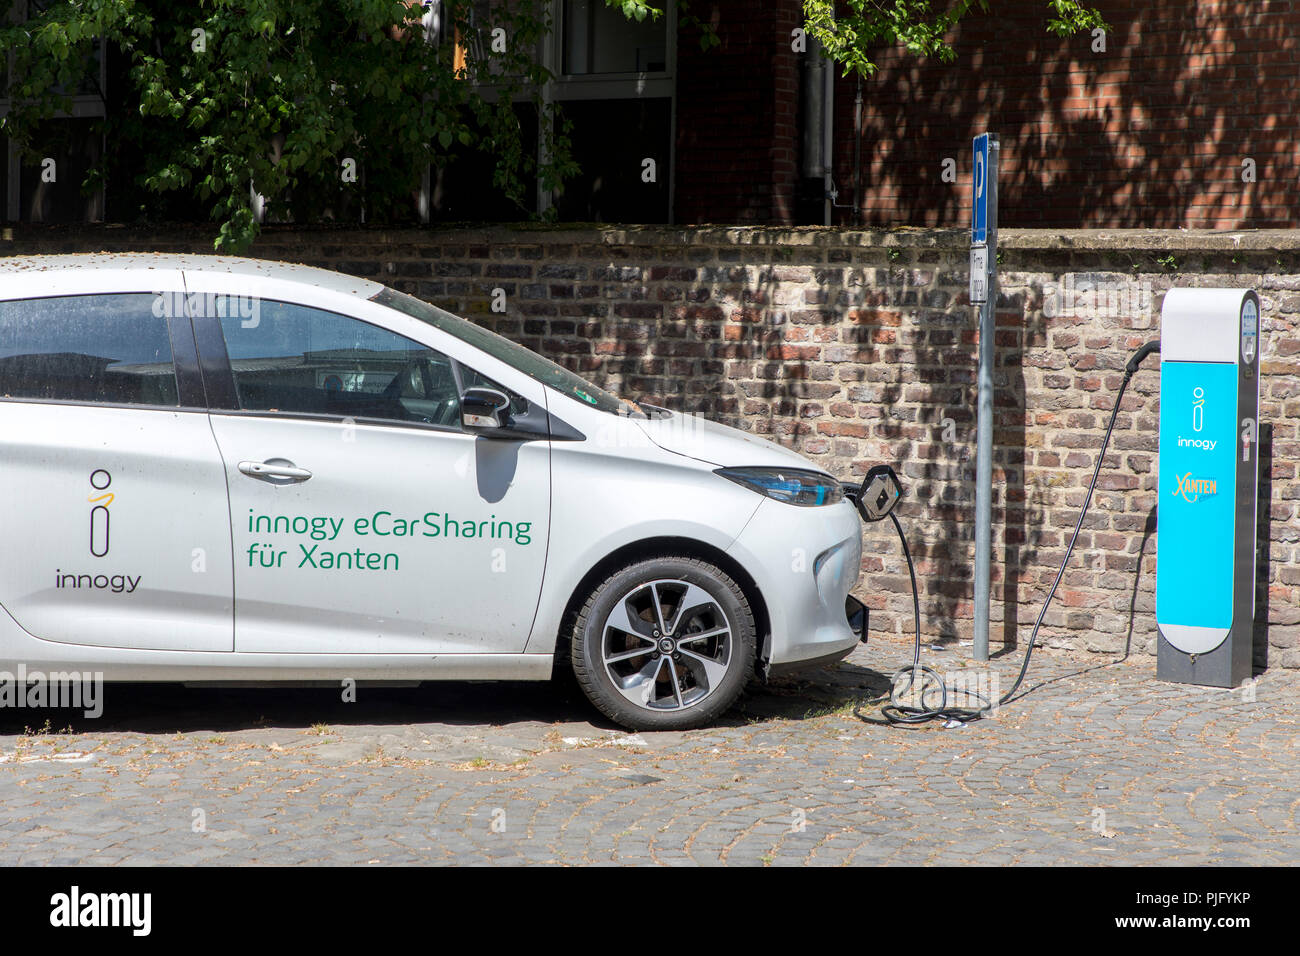 Electric car at a charging station, in Xanten, NRW, Germany, eCar-sharing vehicle from Innogy, Stock Photo